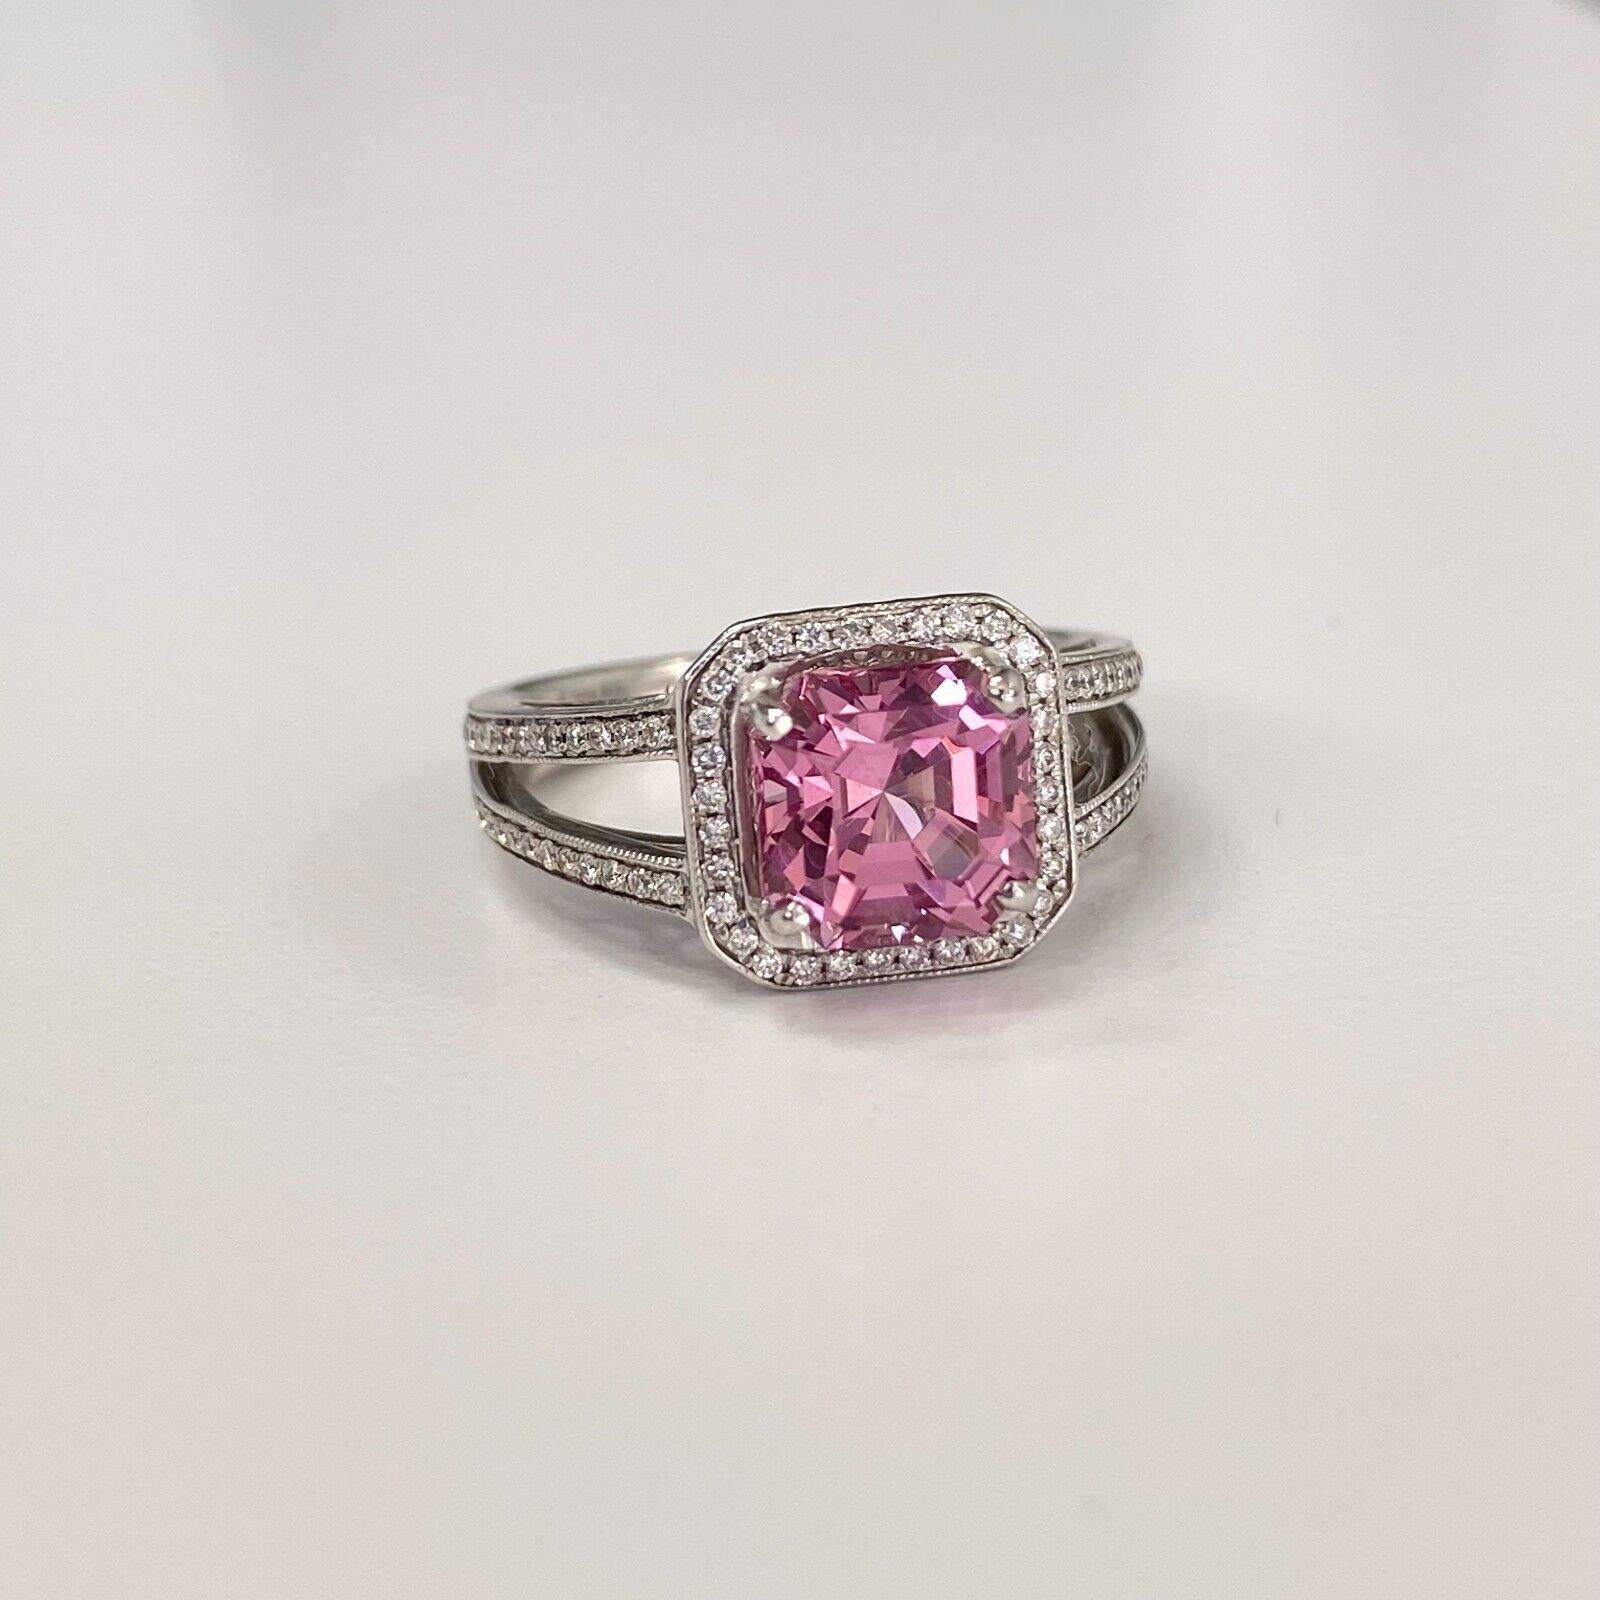 Specifications:
    main stone:2.48 CARAT PINK SPINEL
    DIAMONDS:HI SI
    DIAMONDS carat total weight:APPROX. 0.50 CARAT TOTAL WEIGHT
    color:GH
    clarity:VS2-SI1
    brand:-  metal:18K GOLD
    type: ring
    weight:4.7GrS
    size:5.75